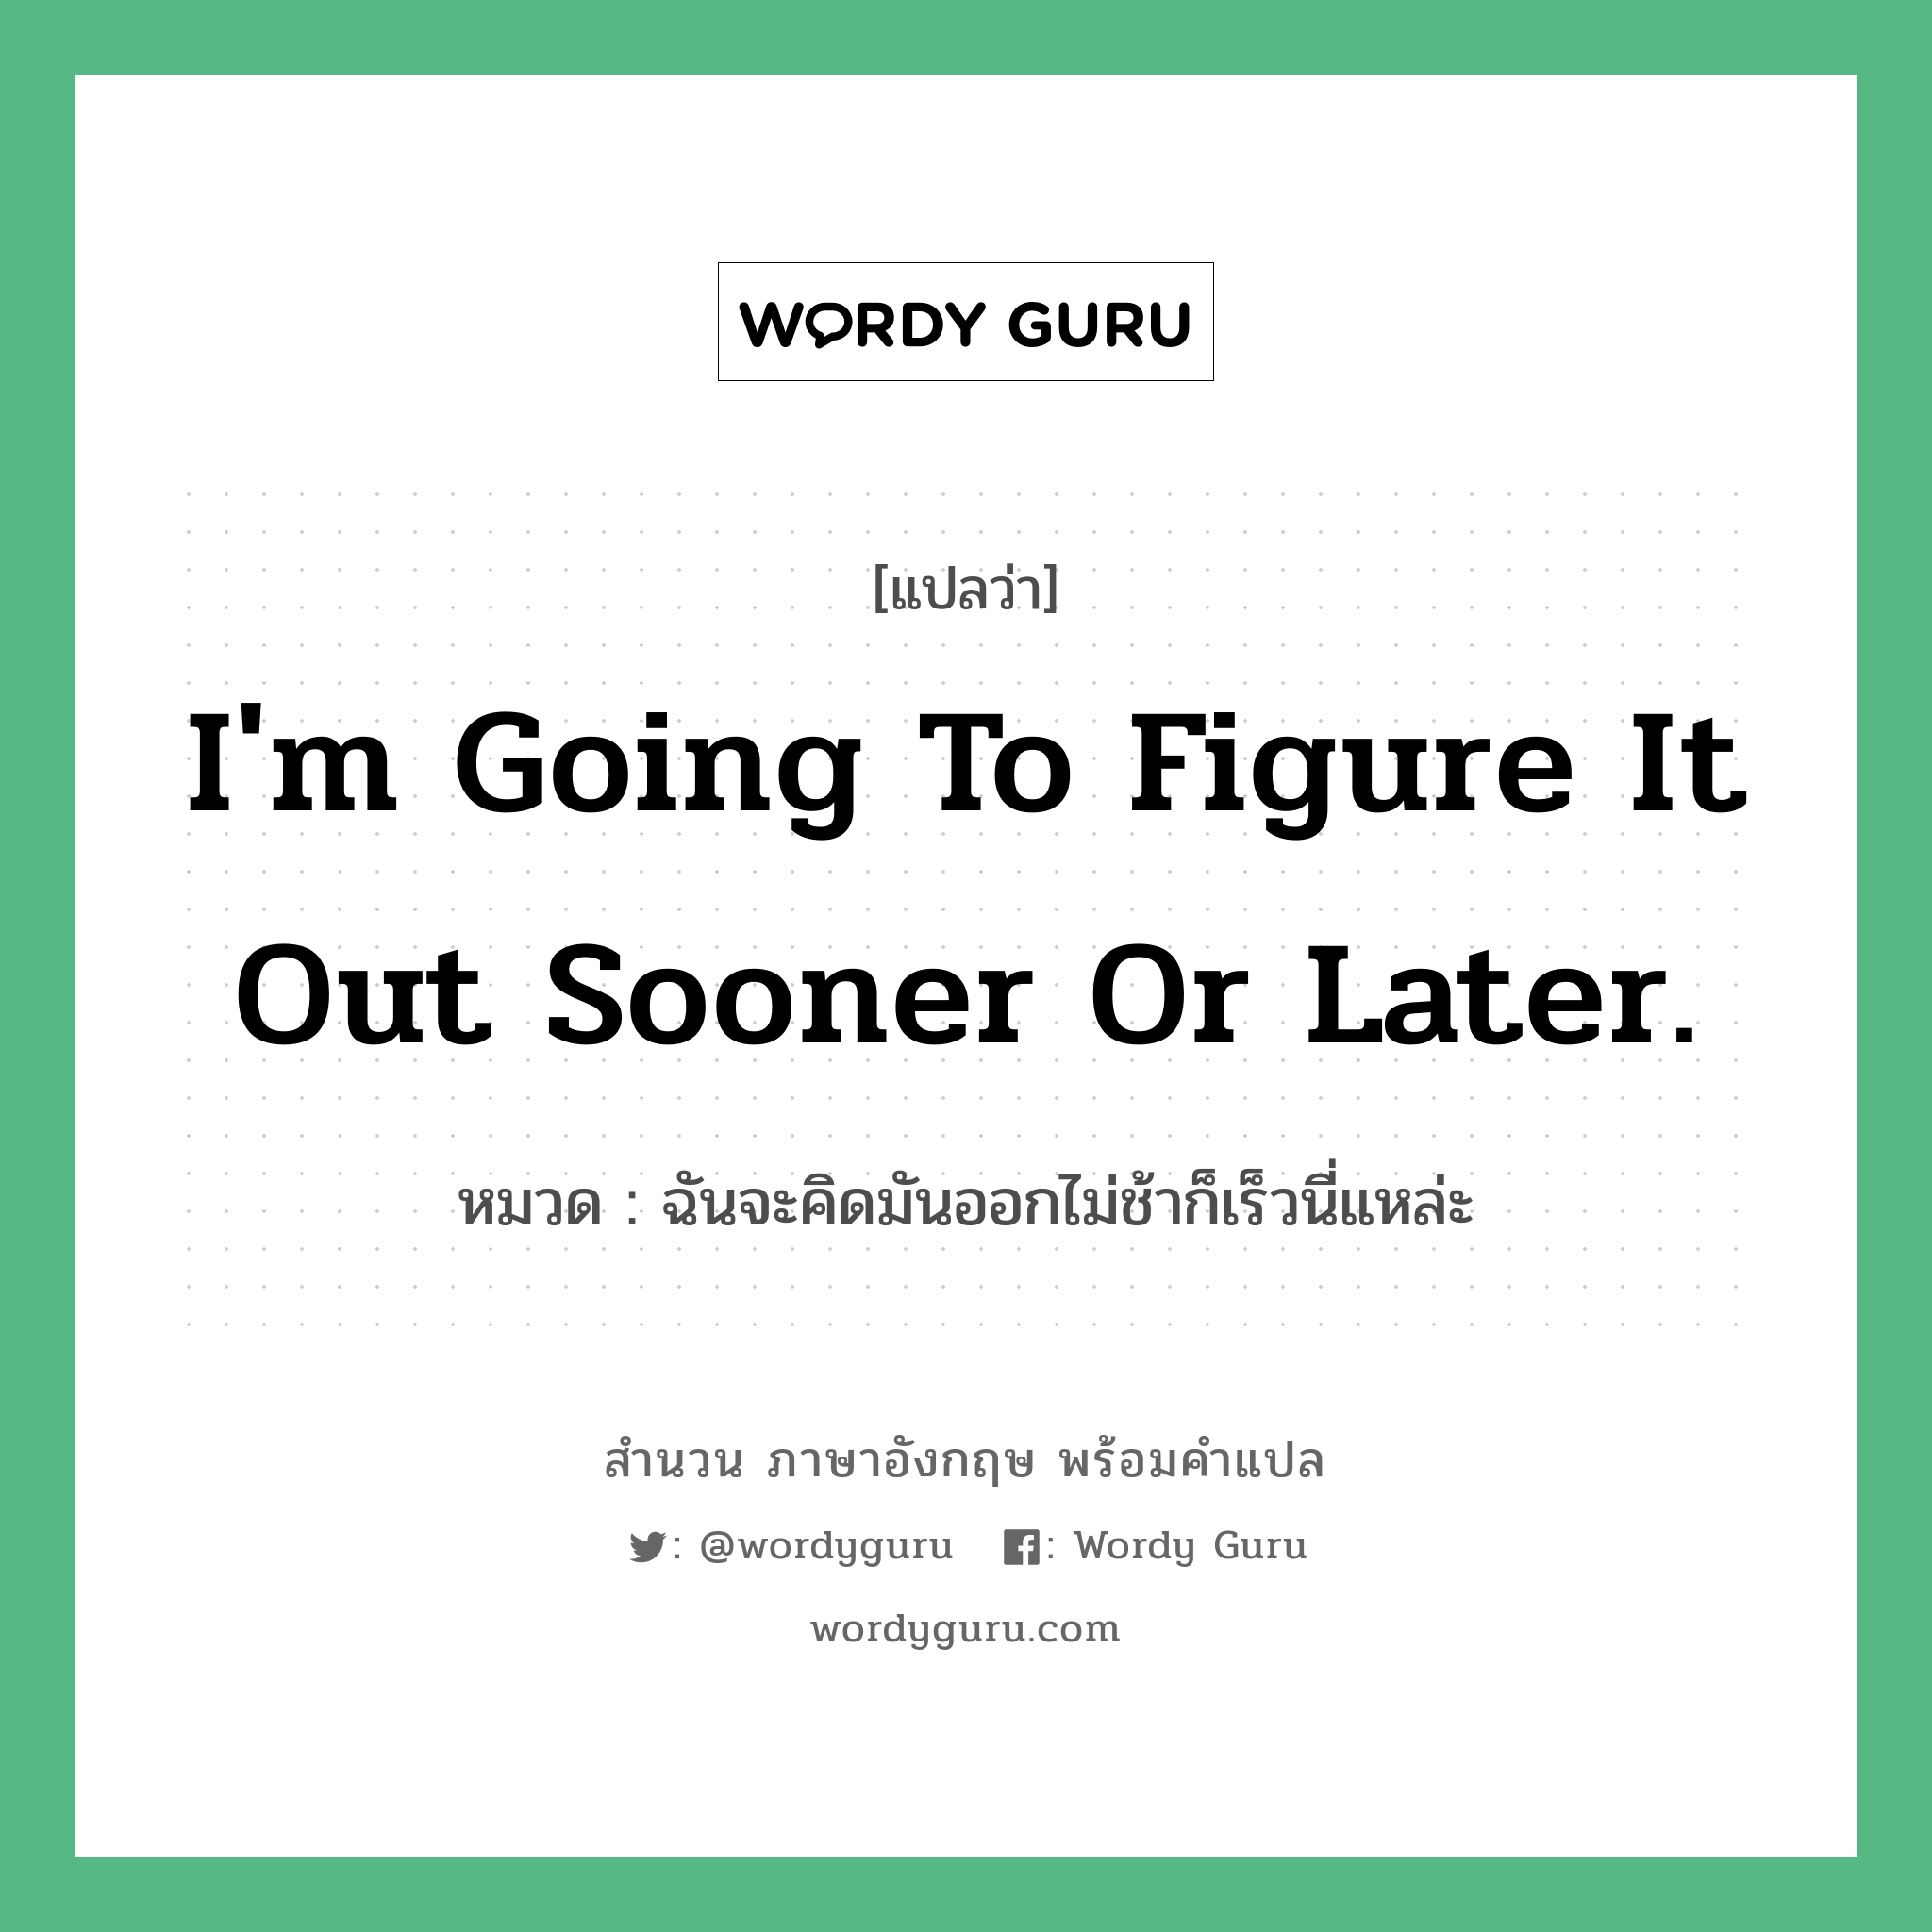 I'm going to figure it out sooner or later. แปลว่า?, สำนวนภาษาอังกฤษ I'm going to figure it out sooner or later. หมวด ฉันจะคิดมันออกไม่ช้าก็เร็วนี่แหล่ะ